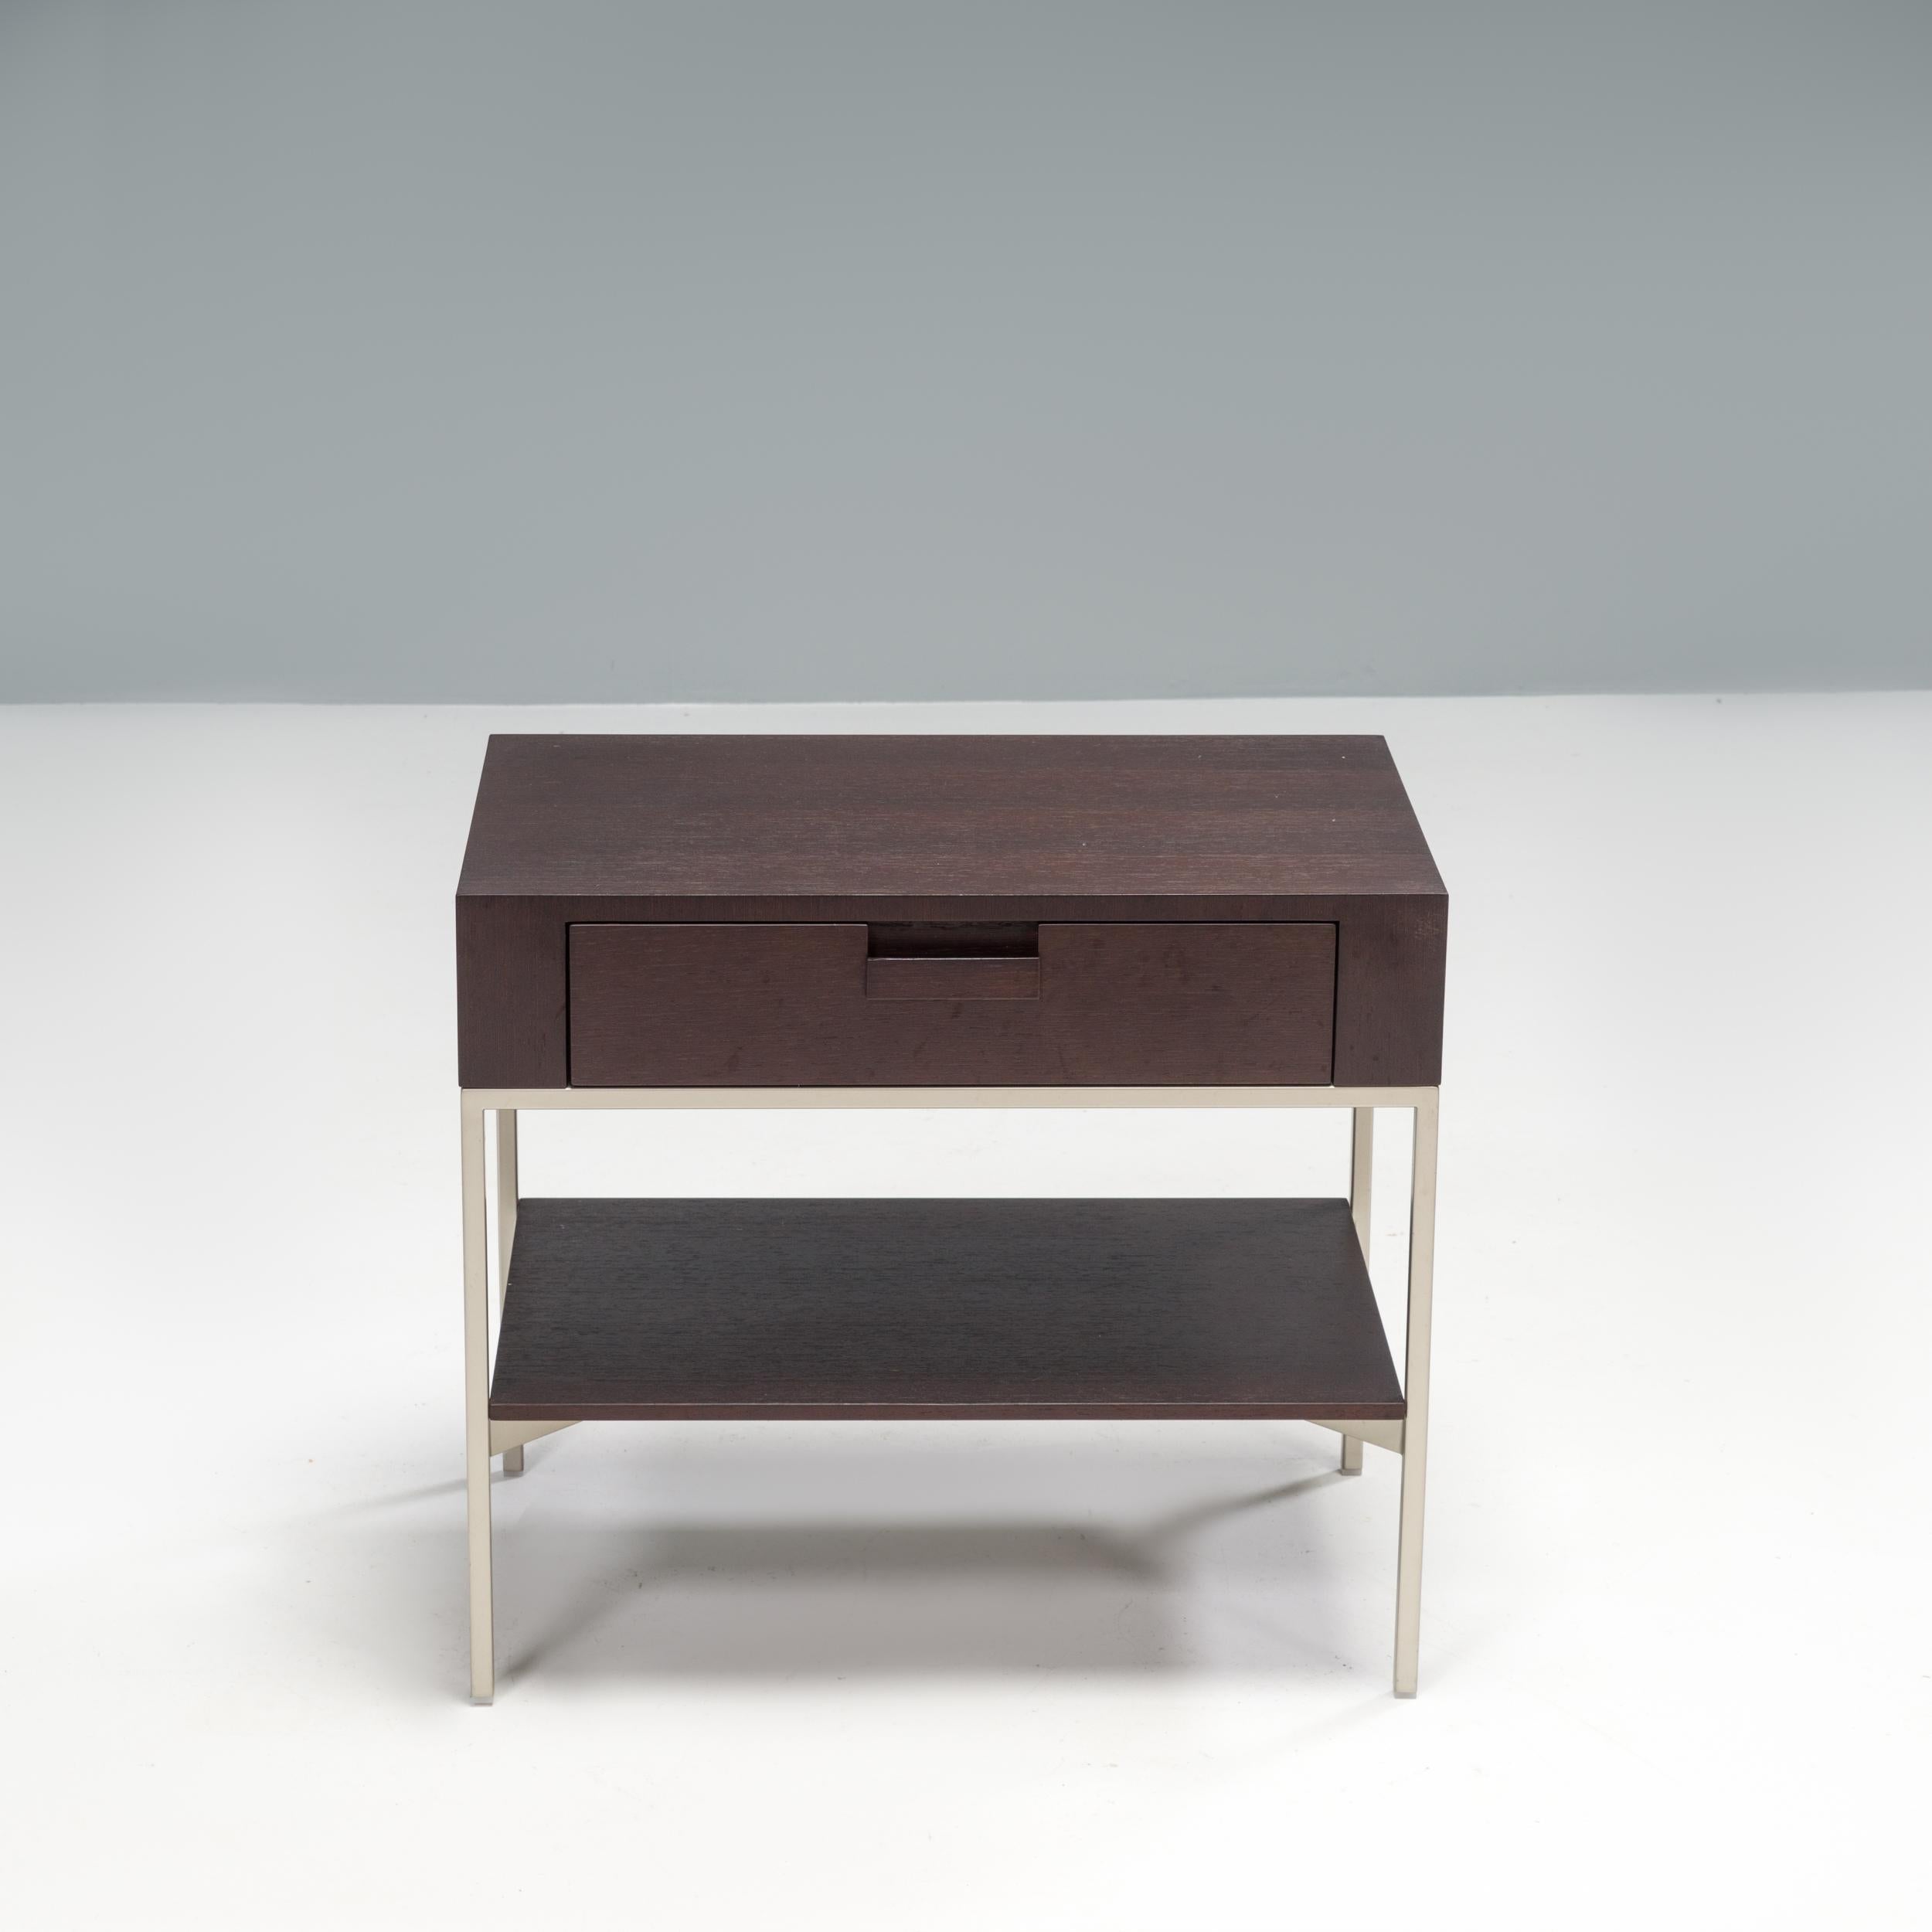 Originally designed by Antonio Citterio for Maxalto in 1996, the Ebe low table is a sleek, classic example of Italian design.

Constructed from grey oak, the table sits on a slimline bright chrome frame and features a single drawer unit with an